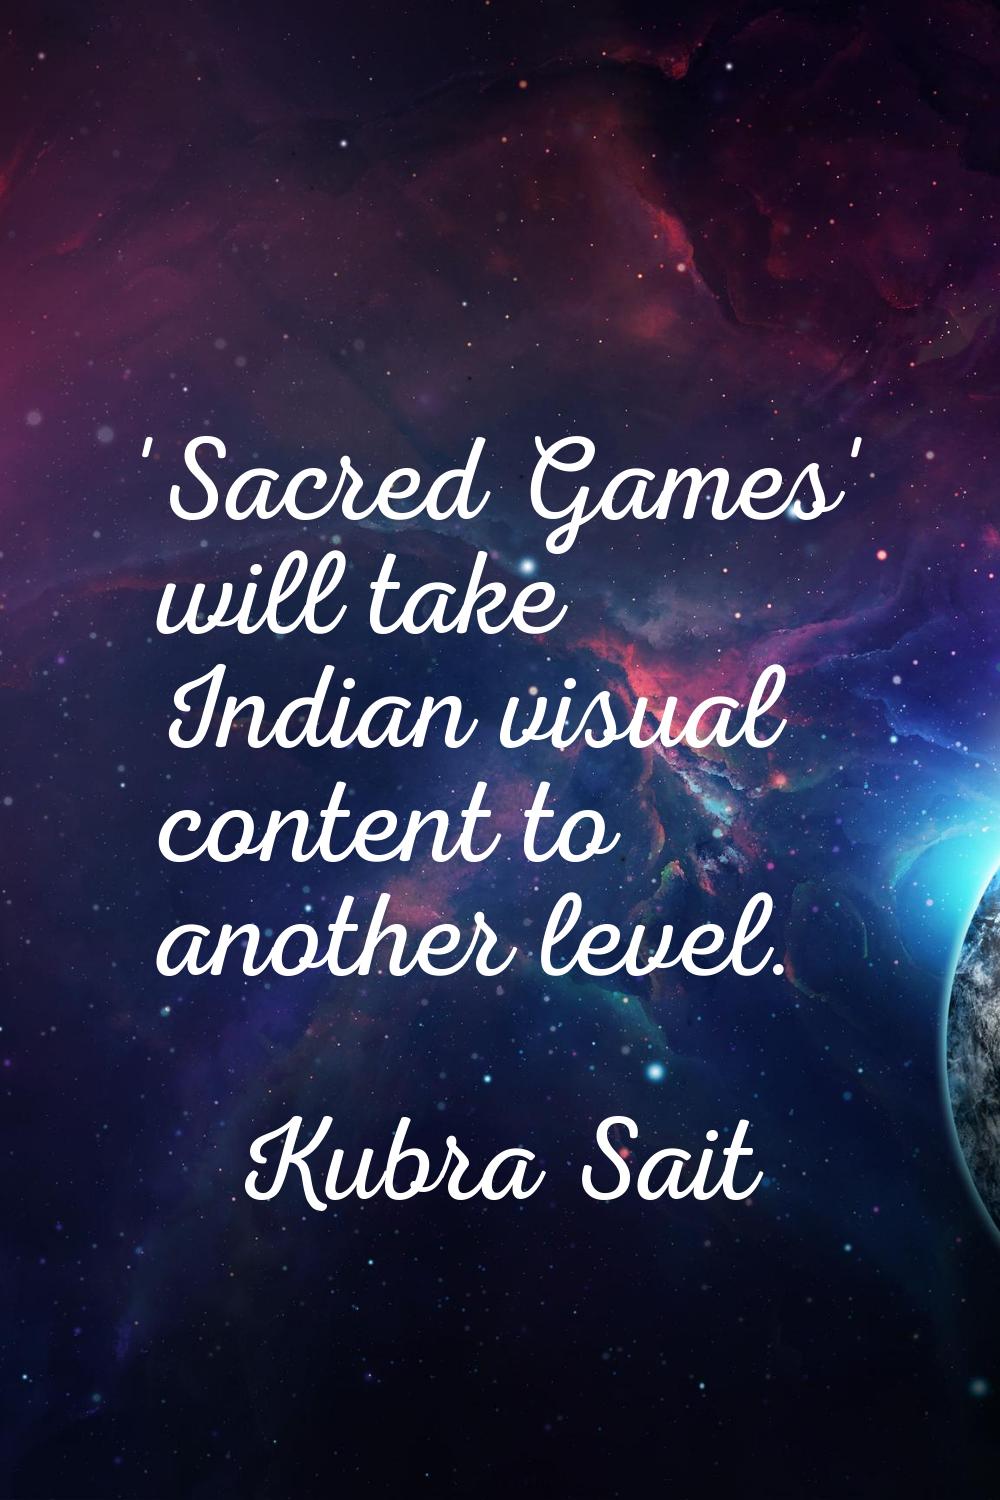 'Sacred Games' will take Indian visual content to another level.